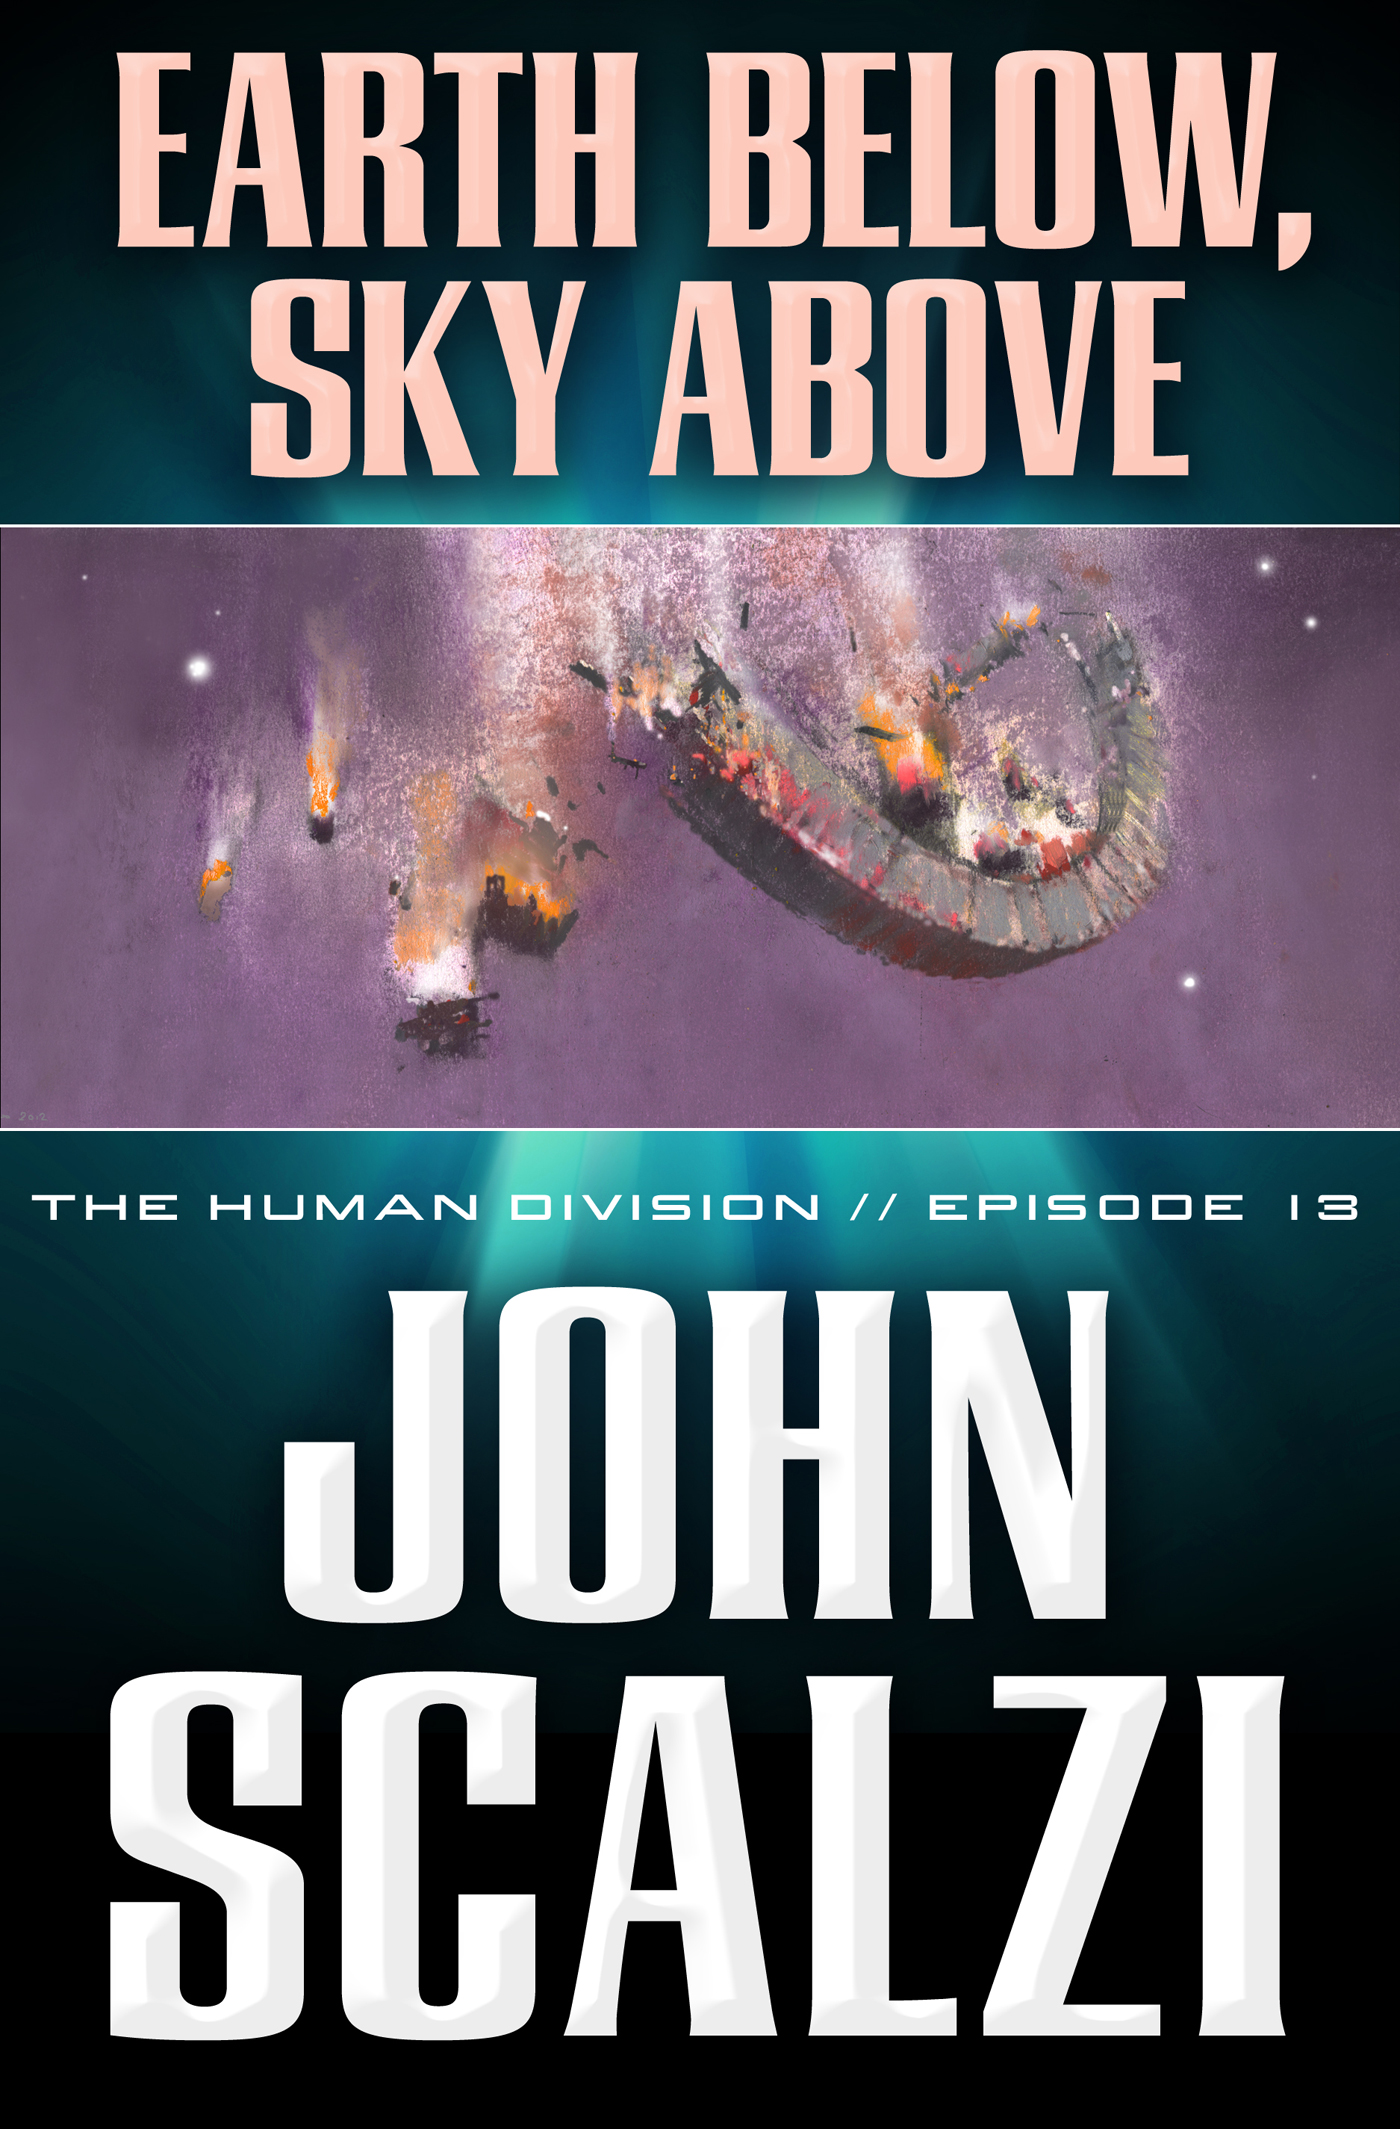 The Human Division #13: Earth Below, Sky Above by John Scalzi